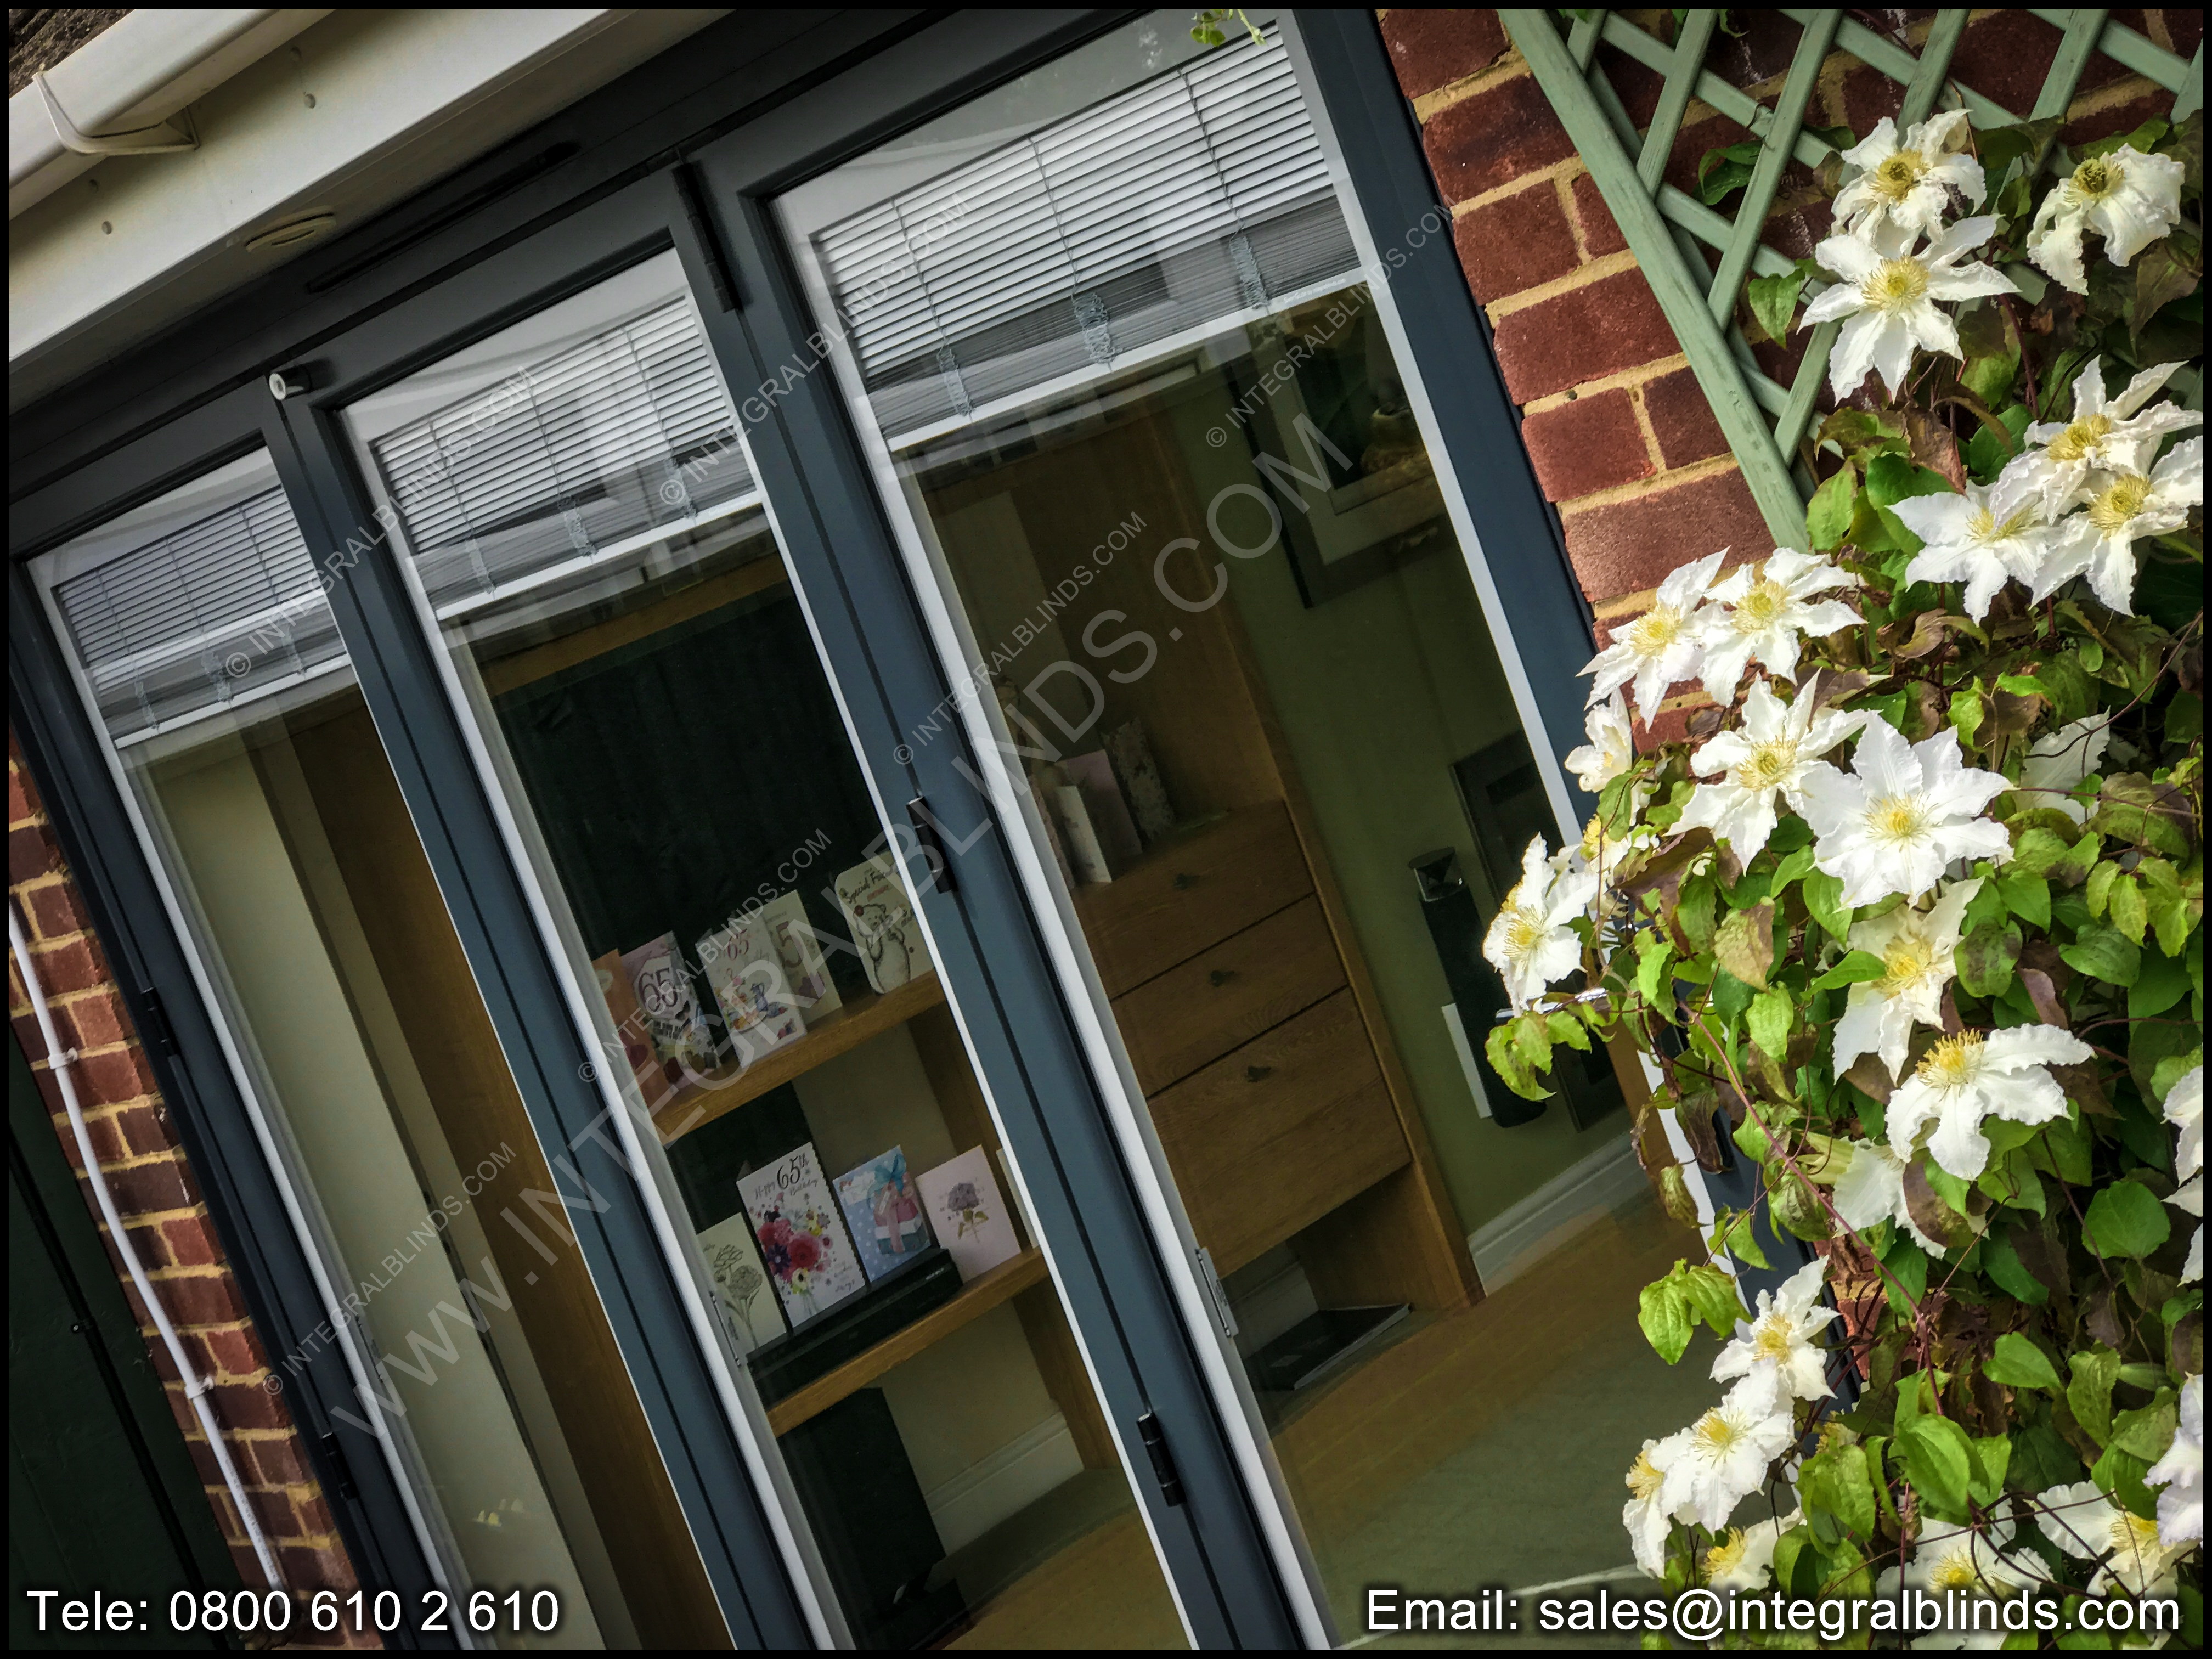 Reynaers Bifold doors with Integral Blinds in Basingstoke